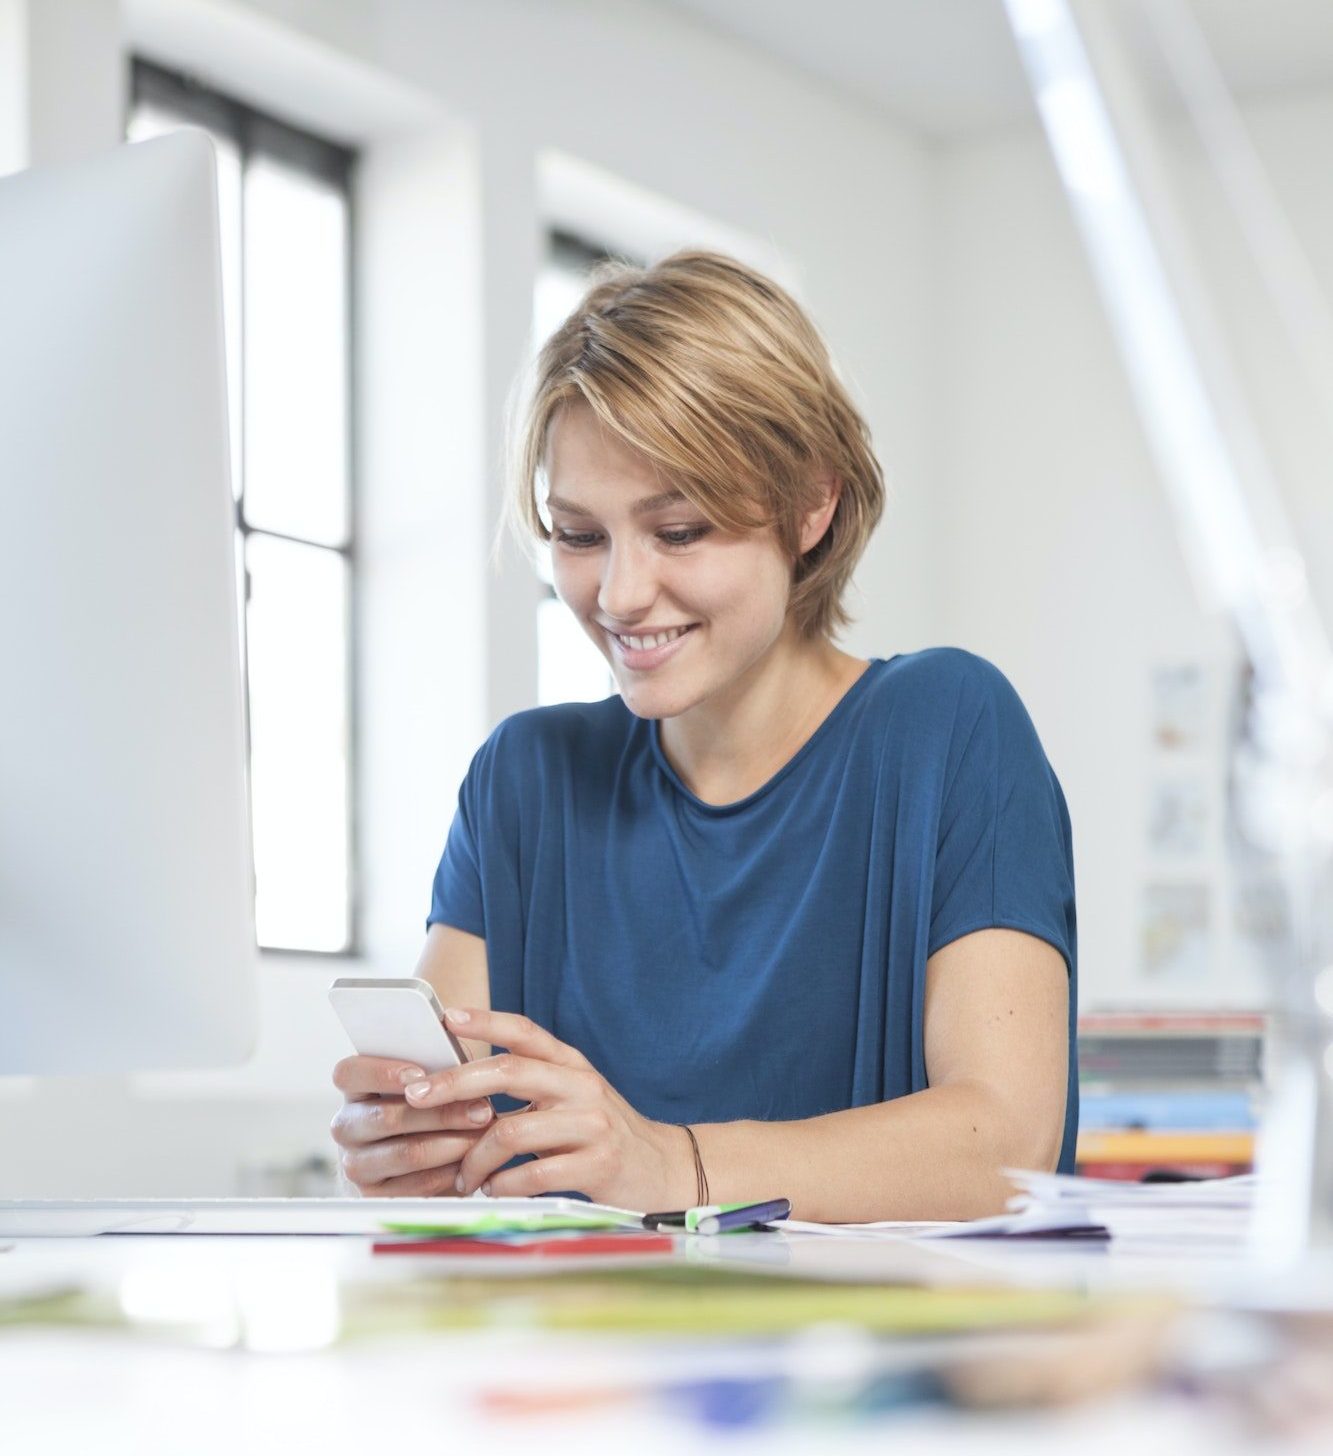 Portrait of smiling young woman using smartphone at her desk in a creative office